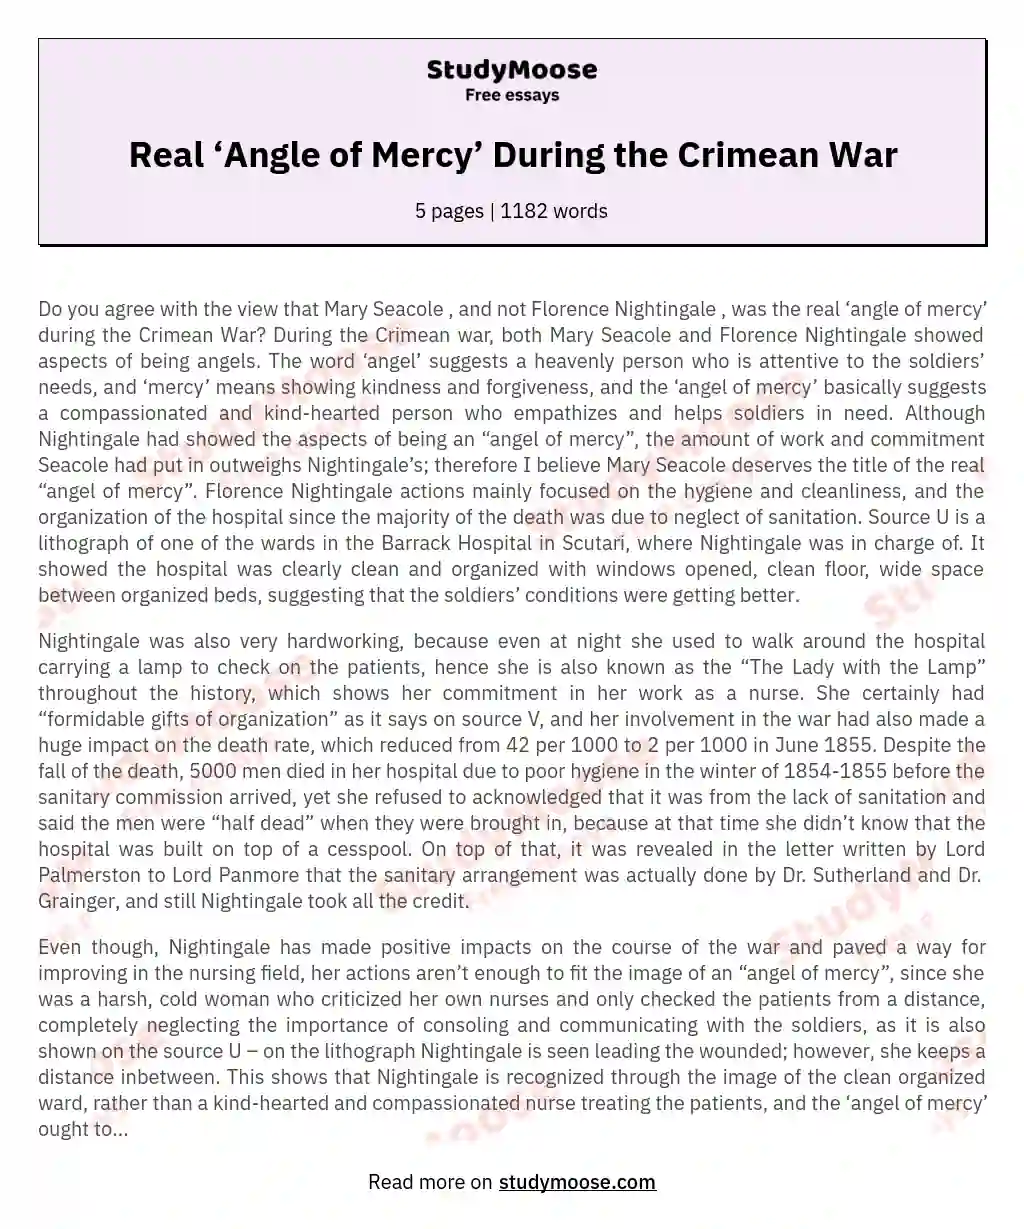 Real ‘Angle of Mercy’ During the Crimean War